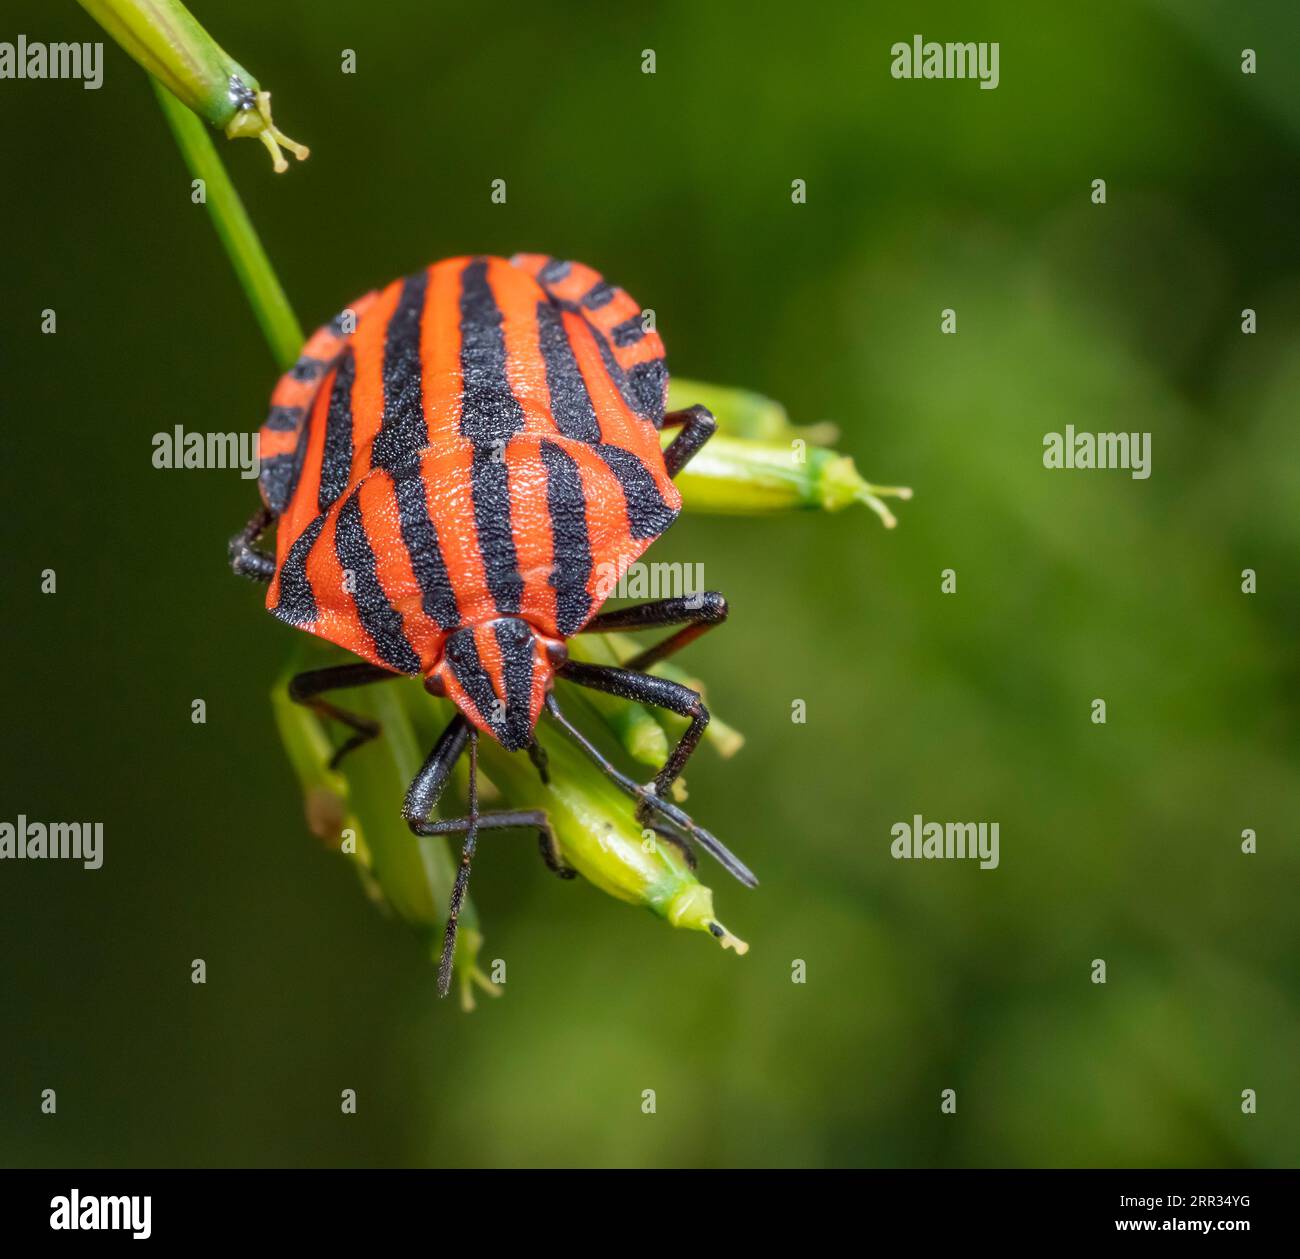 Frontal closeup shot of a Italian striped bug in natural green ambiance Stock Photo